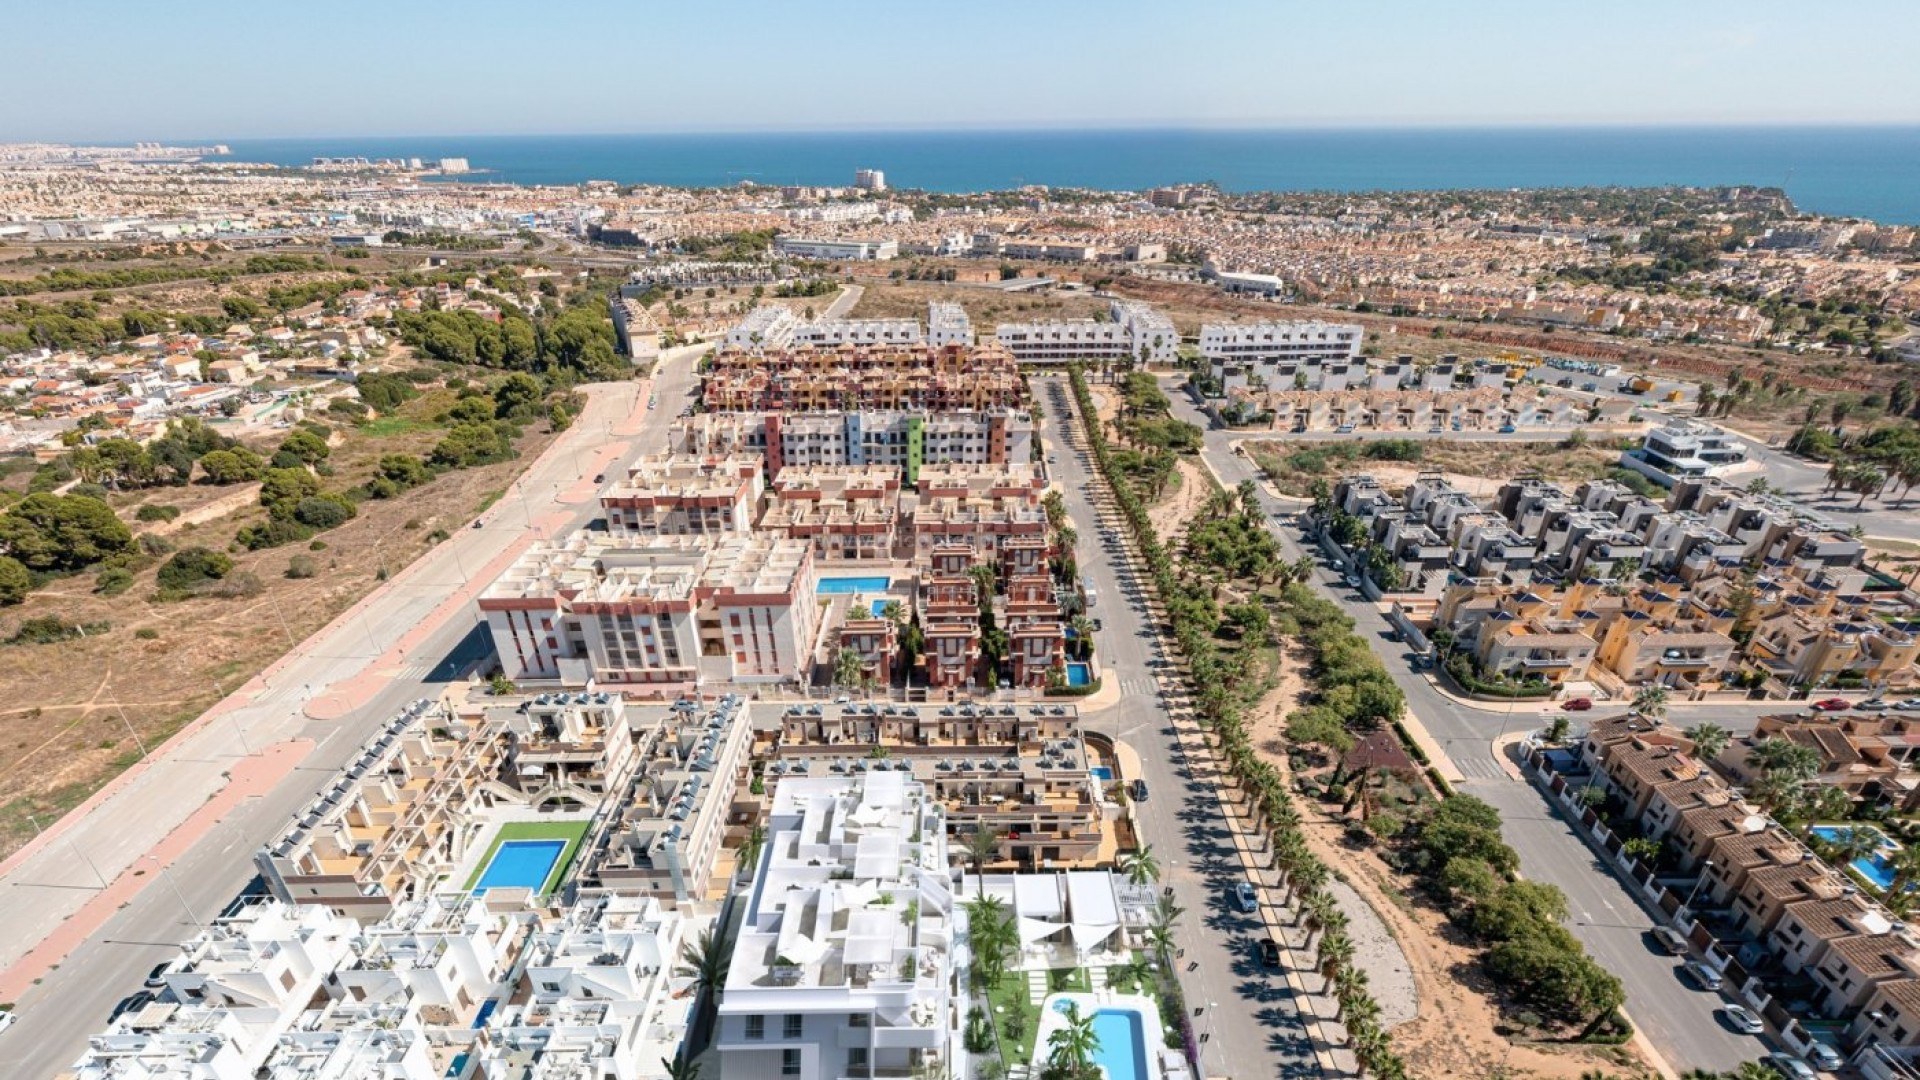 Luxury homes in Lomas de Cabo Roig, apartments and penthouses, 2/3 bedrooms and 2 bathrooms, common areas, garden and play area around, large swimming pool